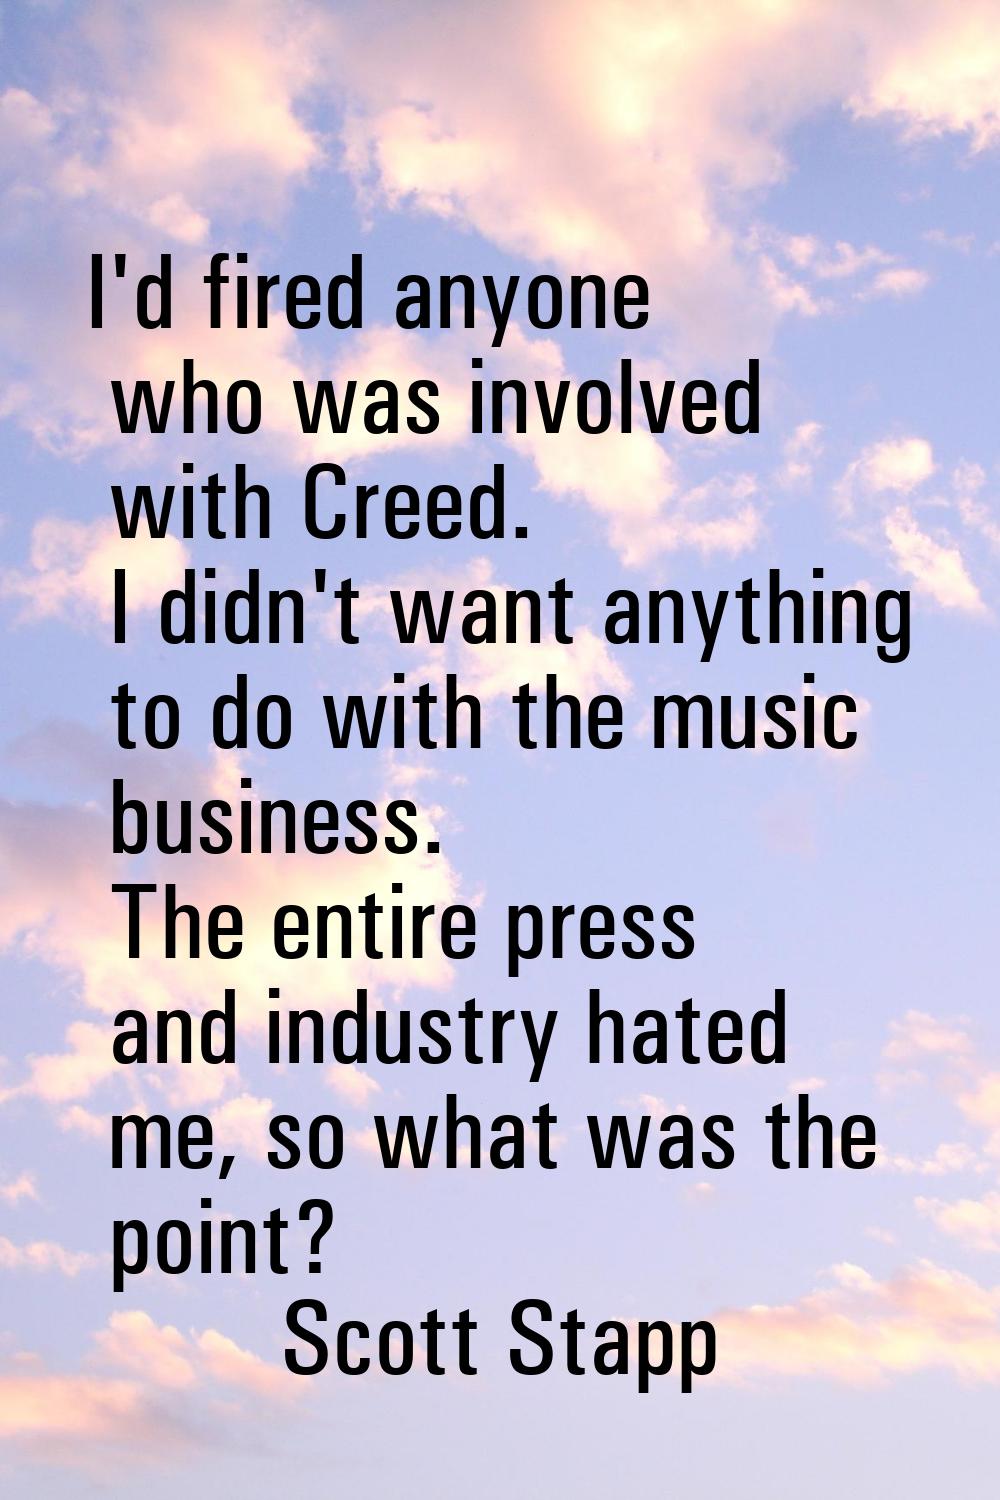 I'd fired anyone who was involved with Creed. I didn't want anything to do with the music business.